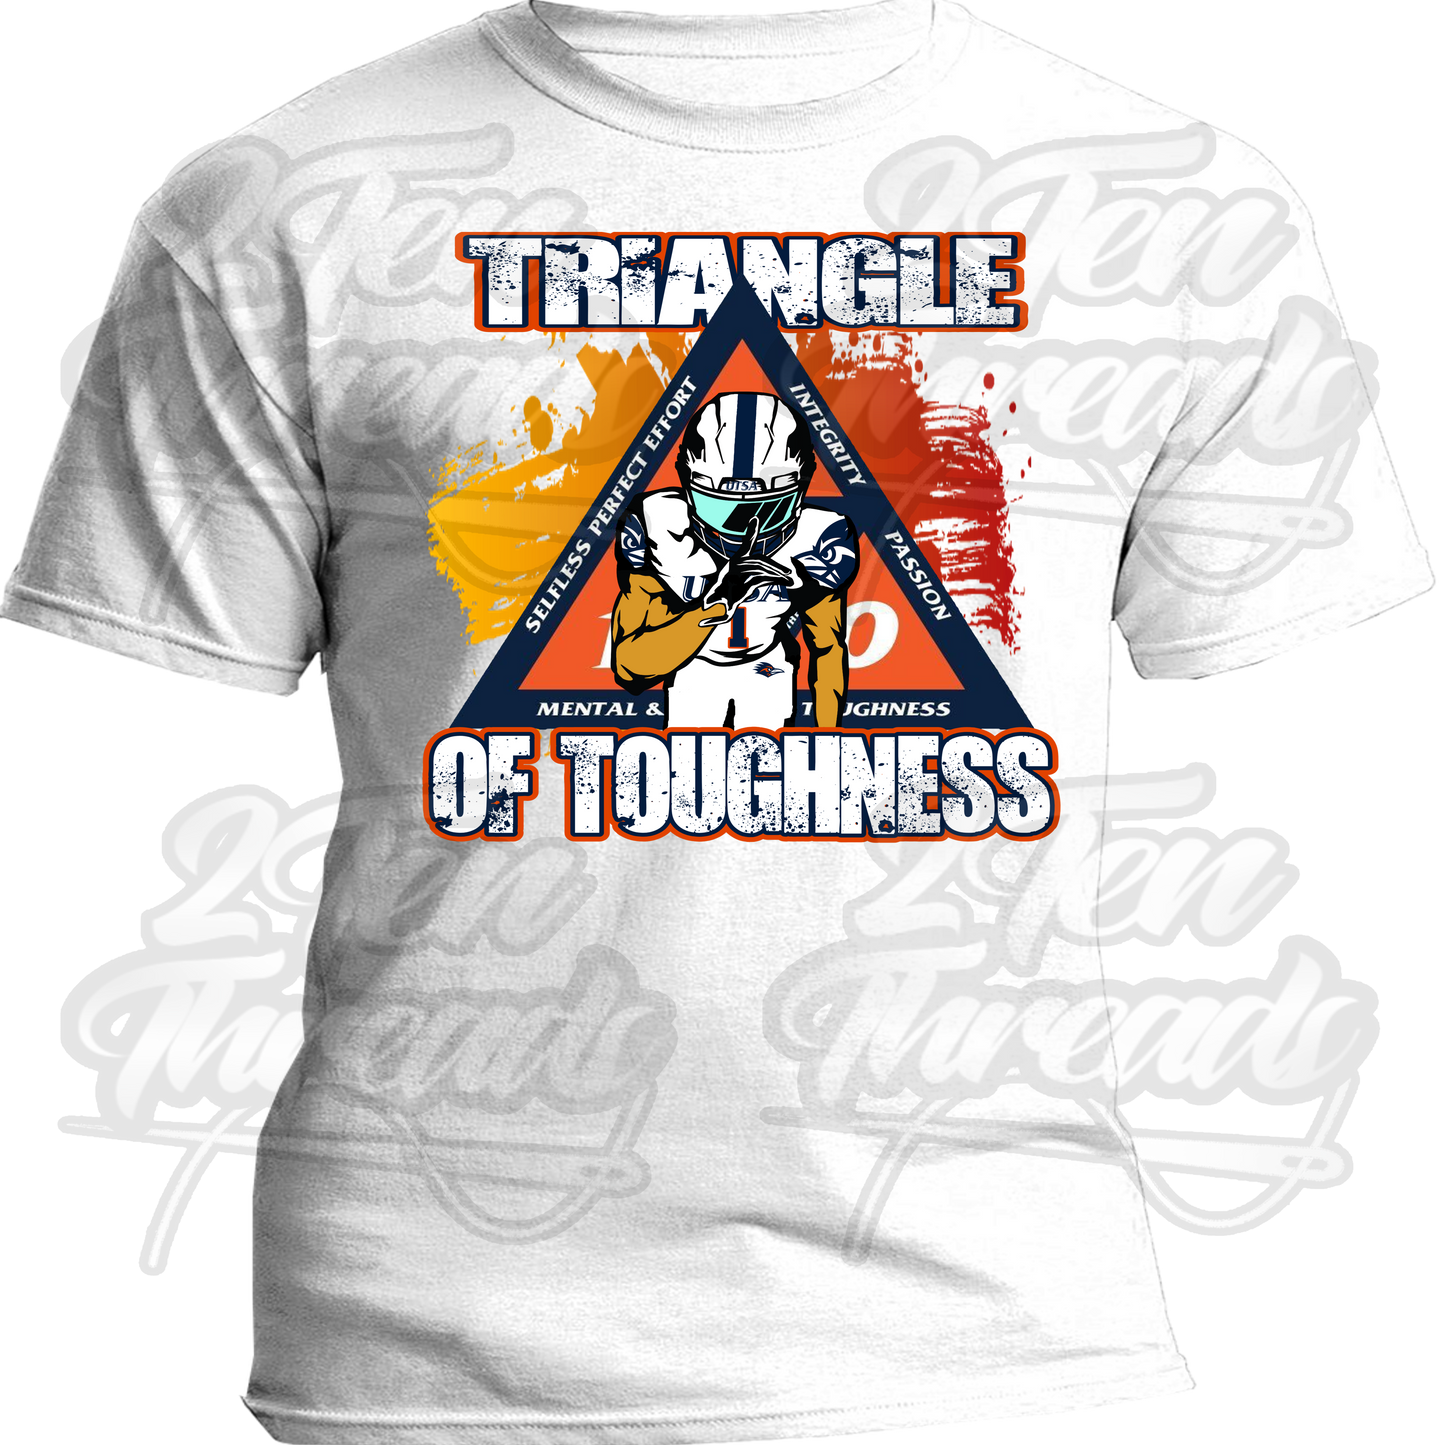 Triangle of Toughness Shirt